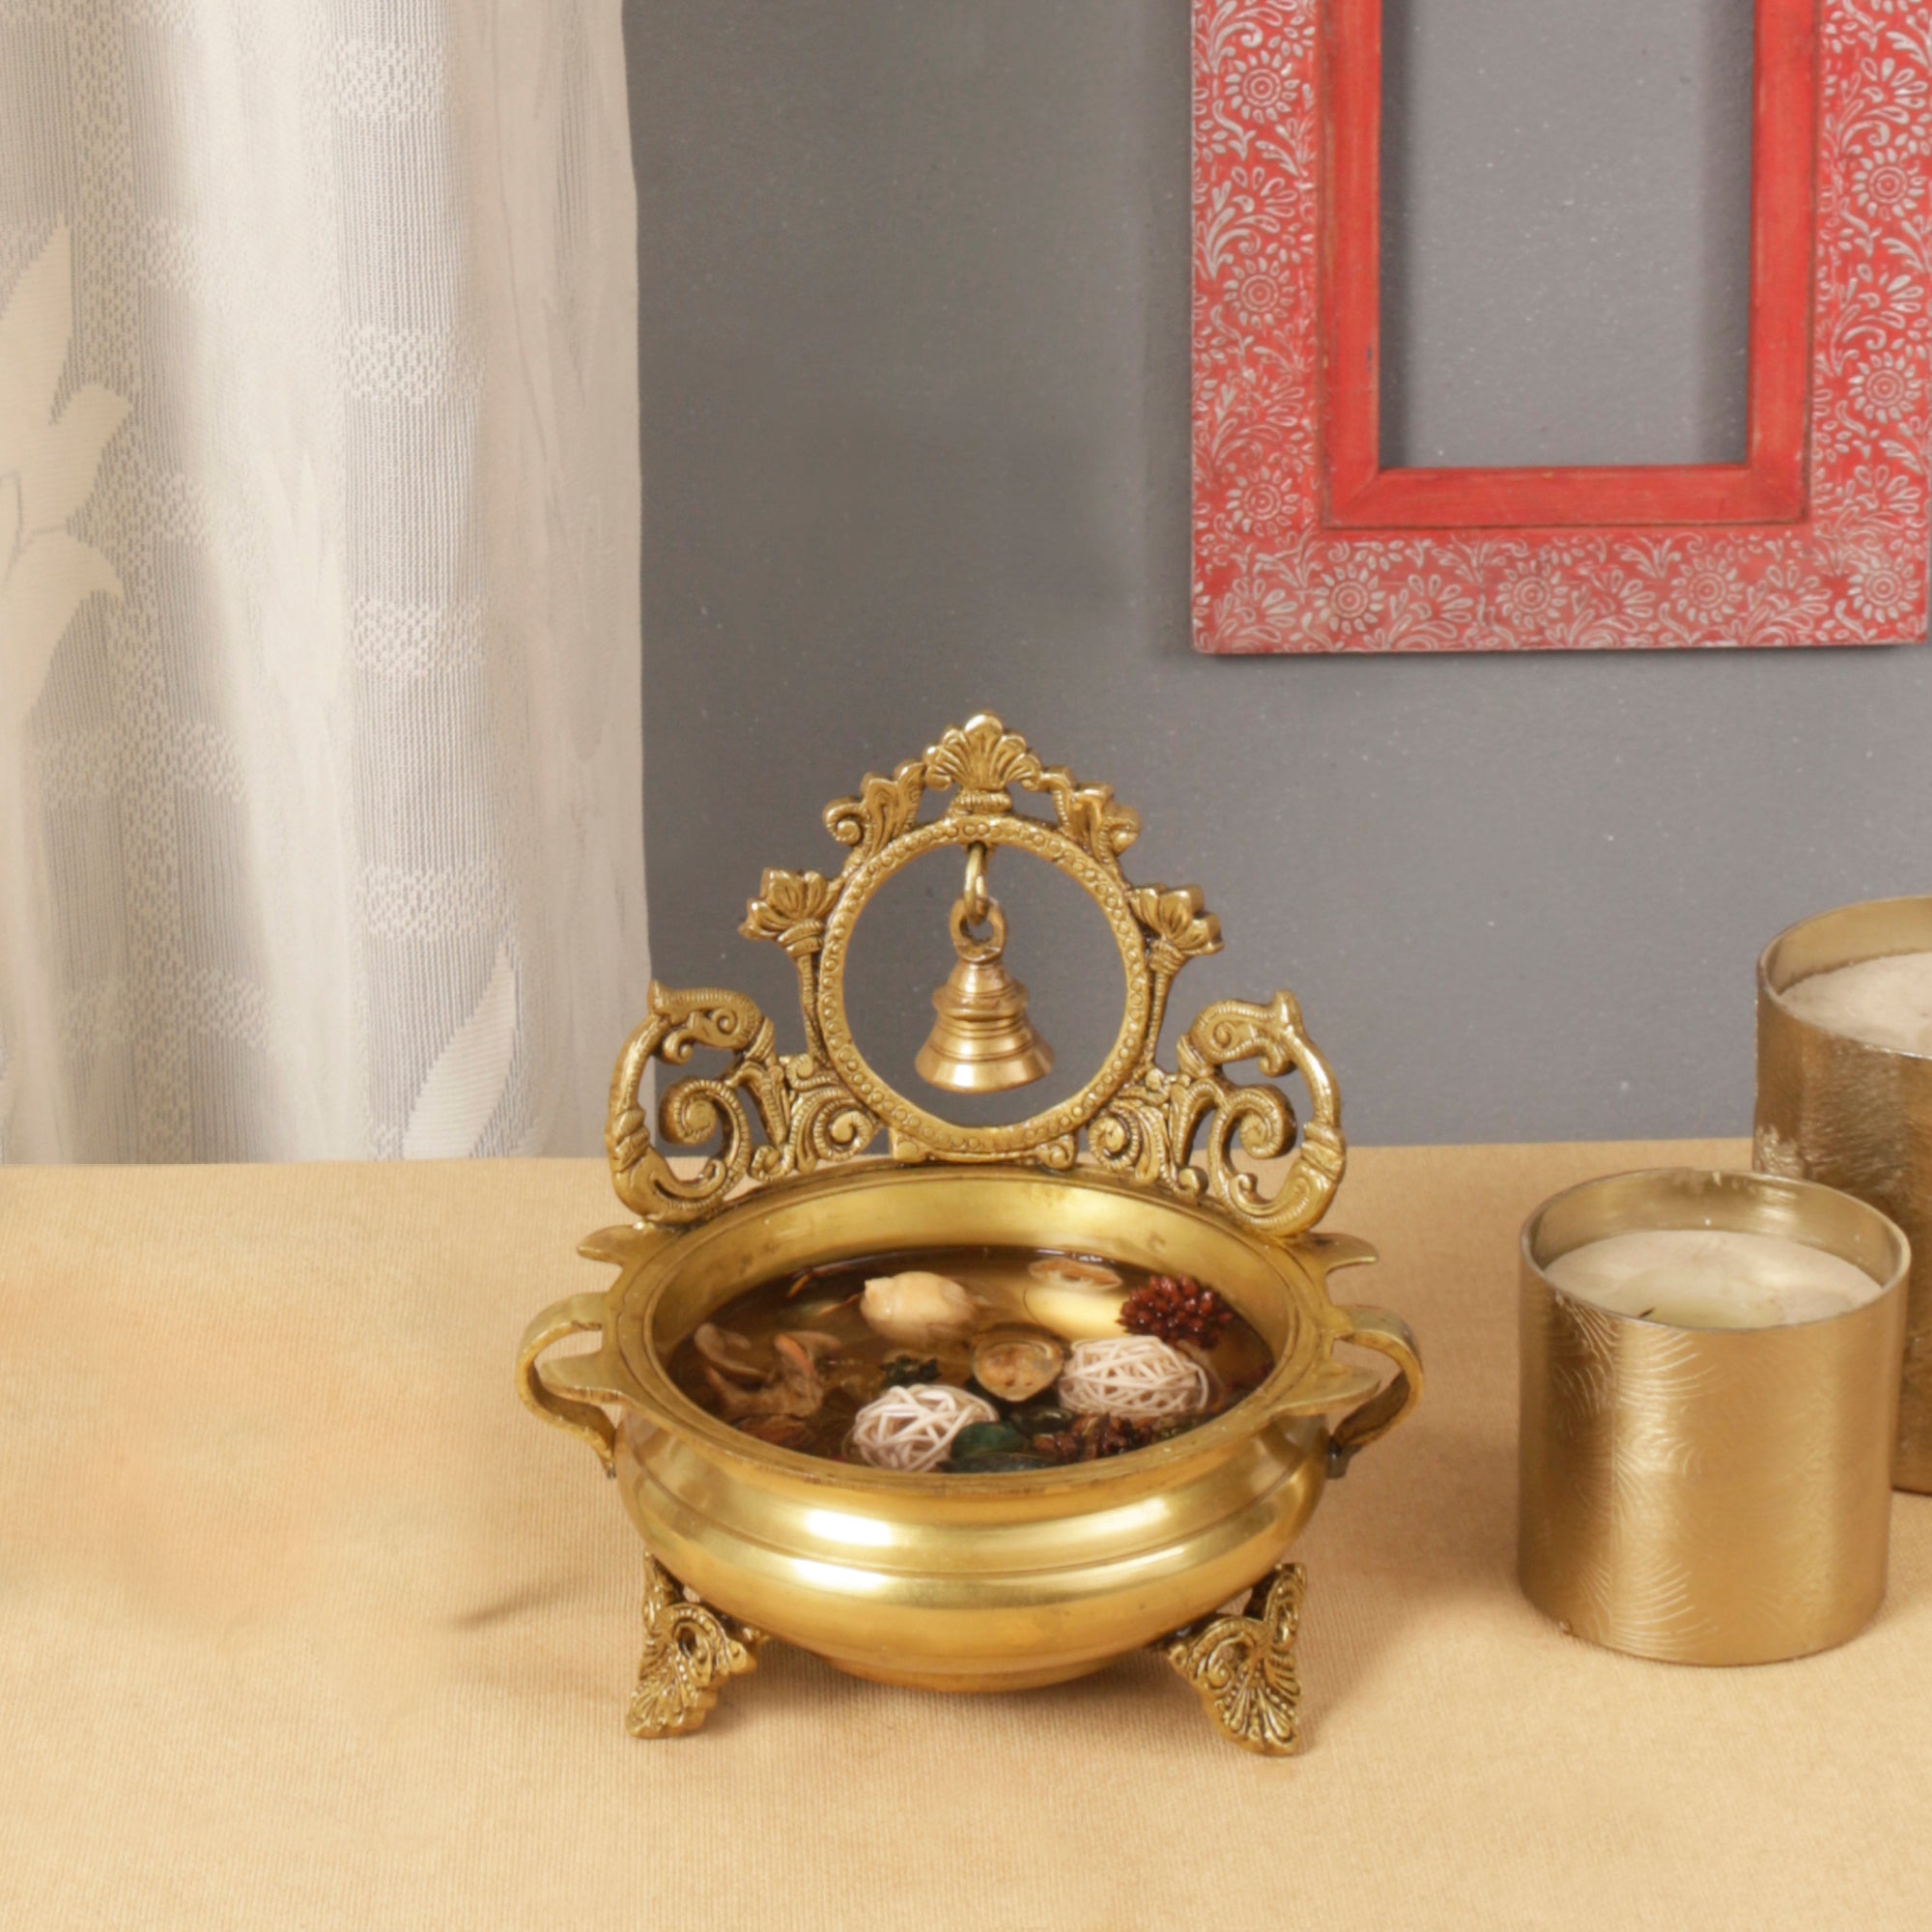 Ethnic Indian Carved Brass Decor Urli Bowl with Bell